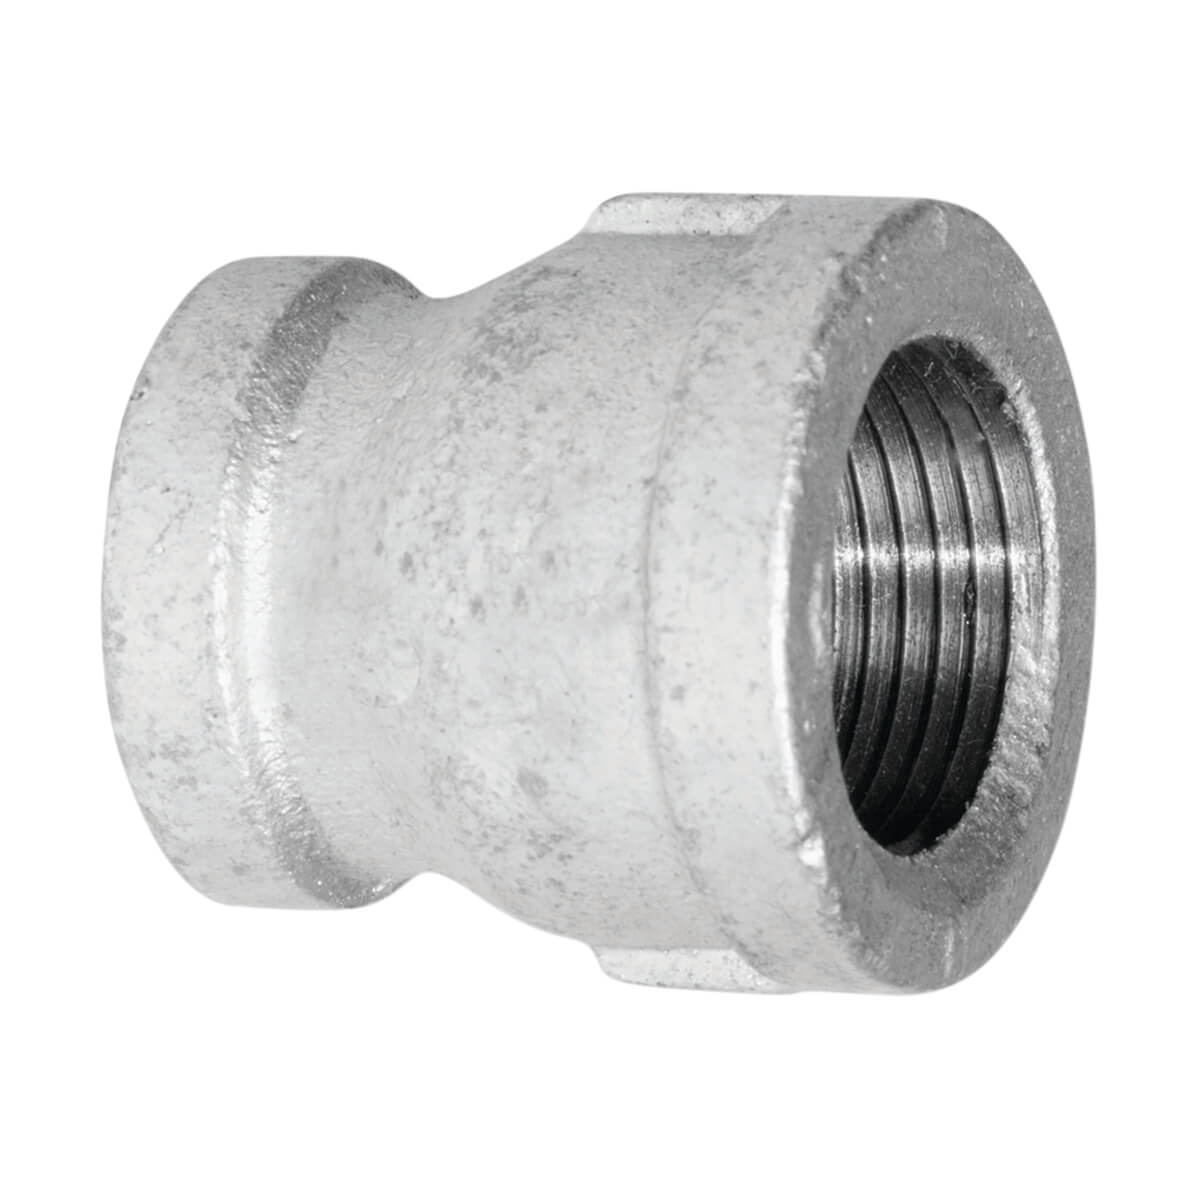 Fitting Galvanized Iron Coupling - 2-in x 1-in